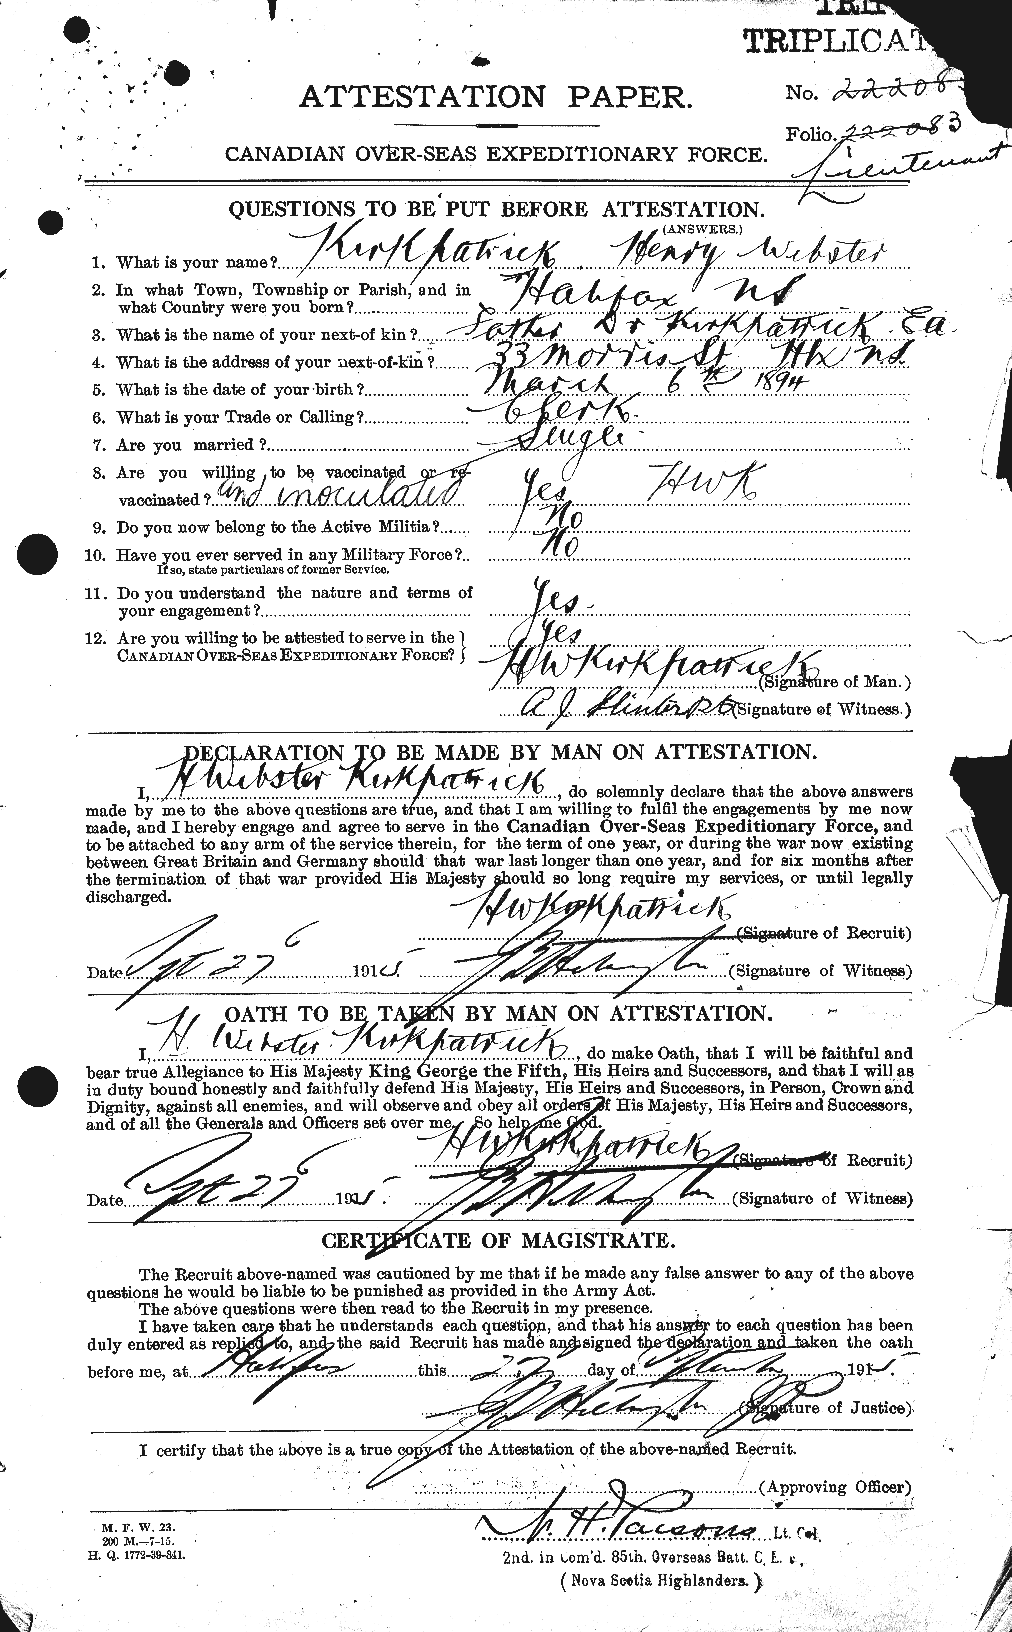 Personnel Records of the First World War - CEF 436064a